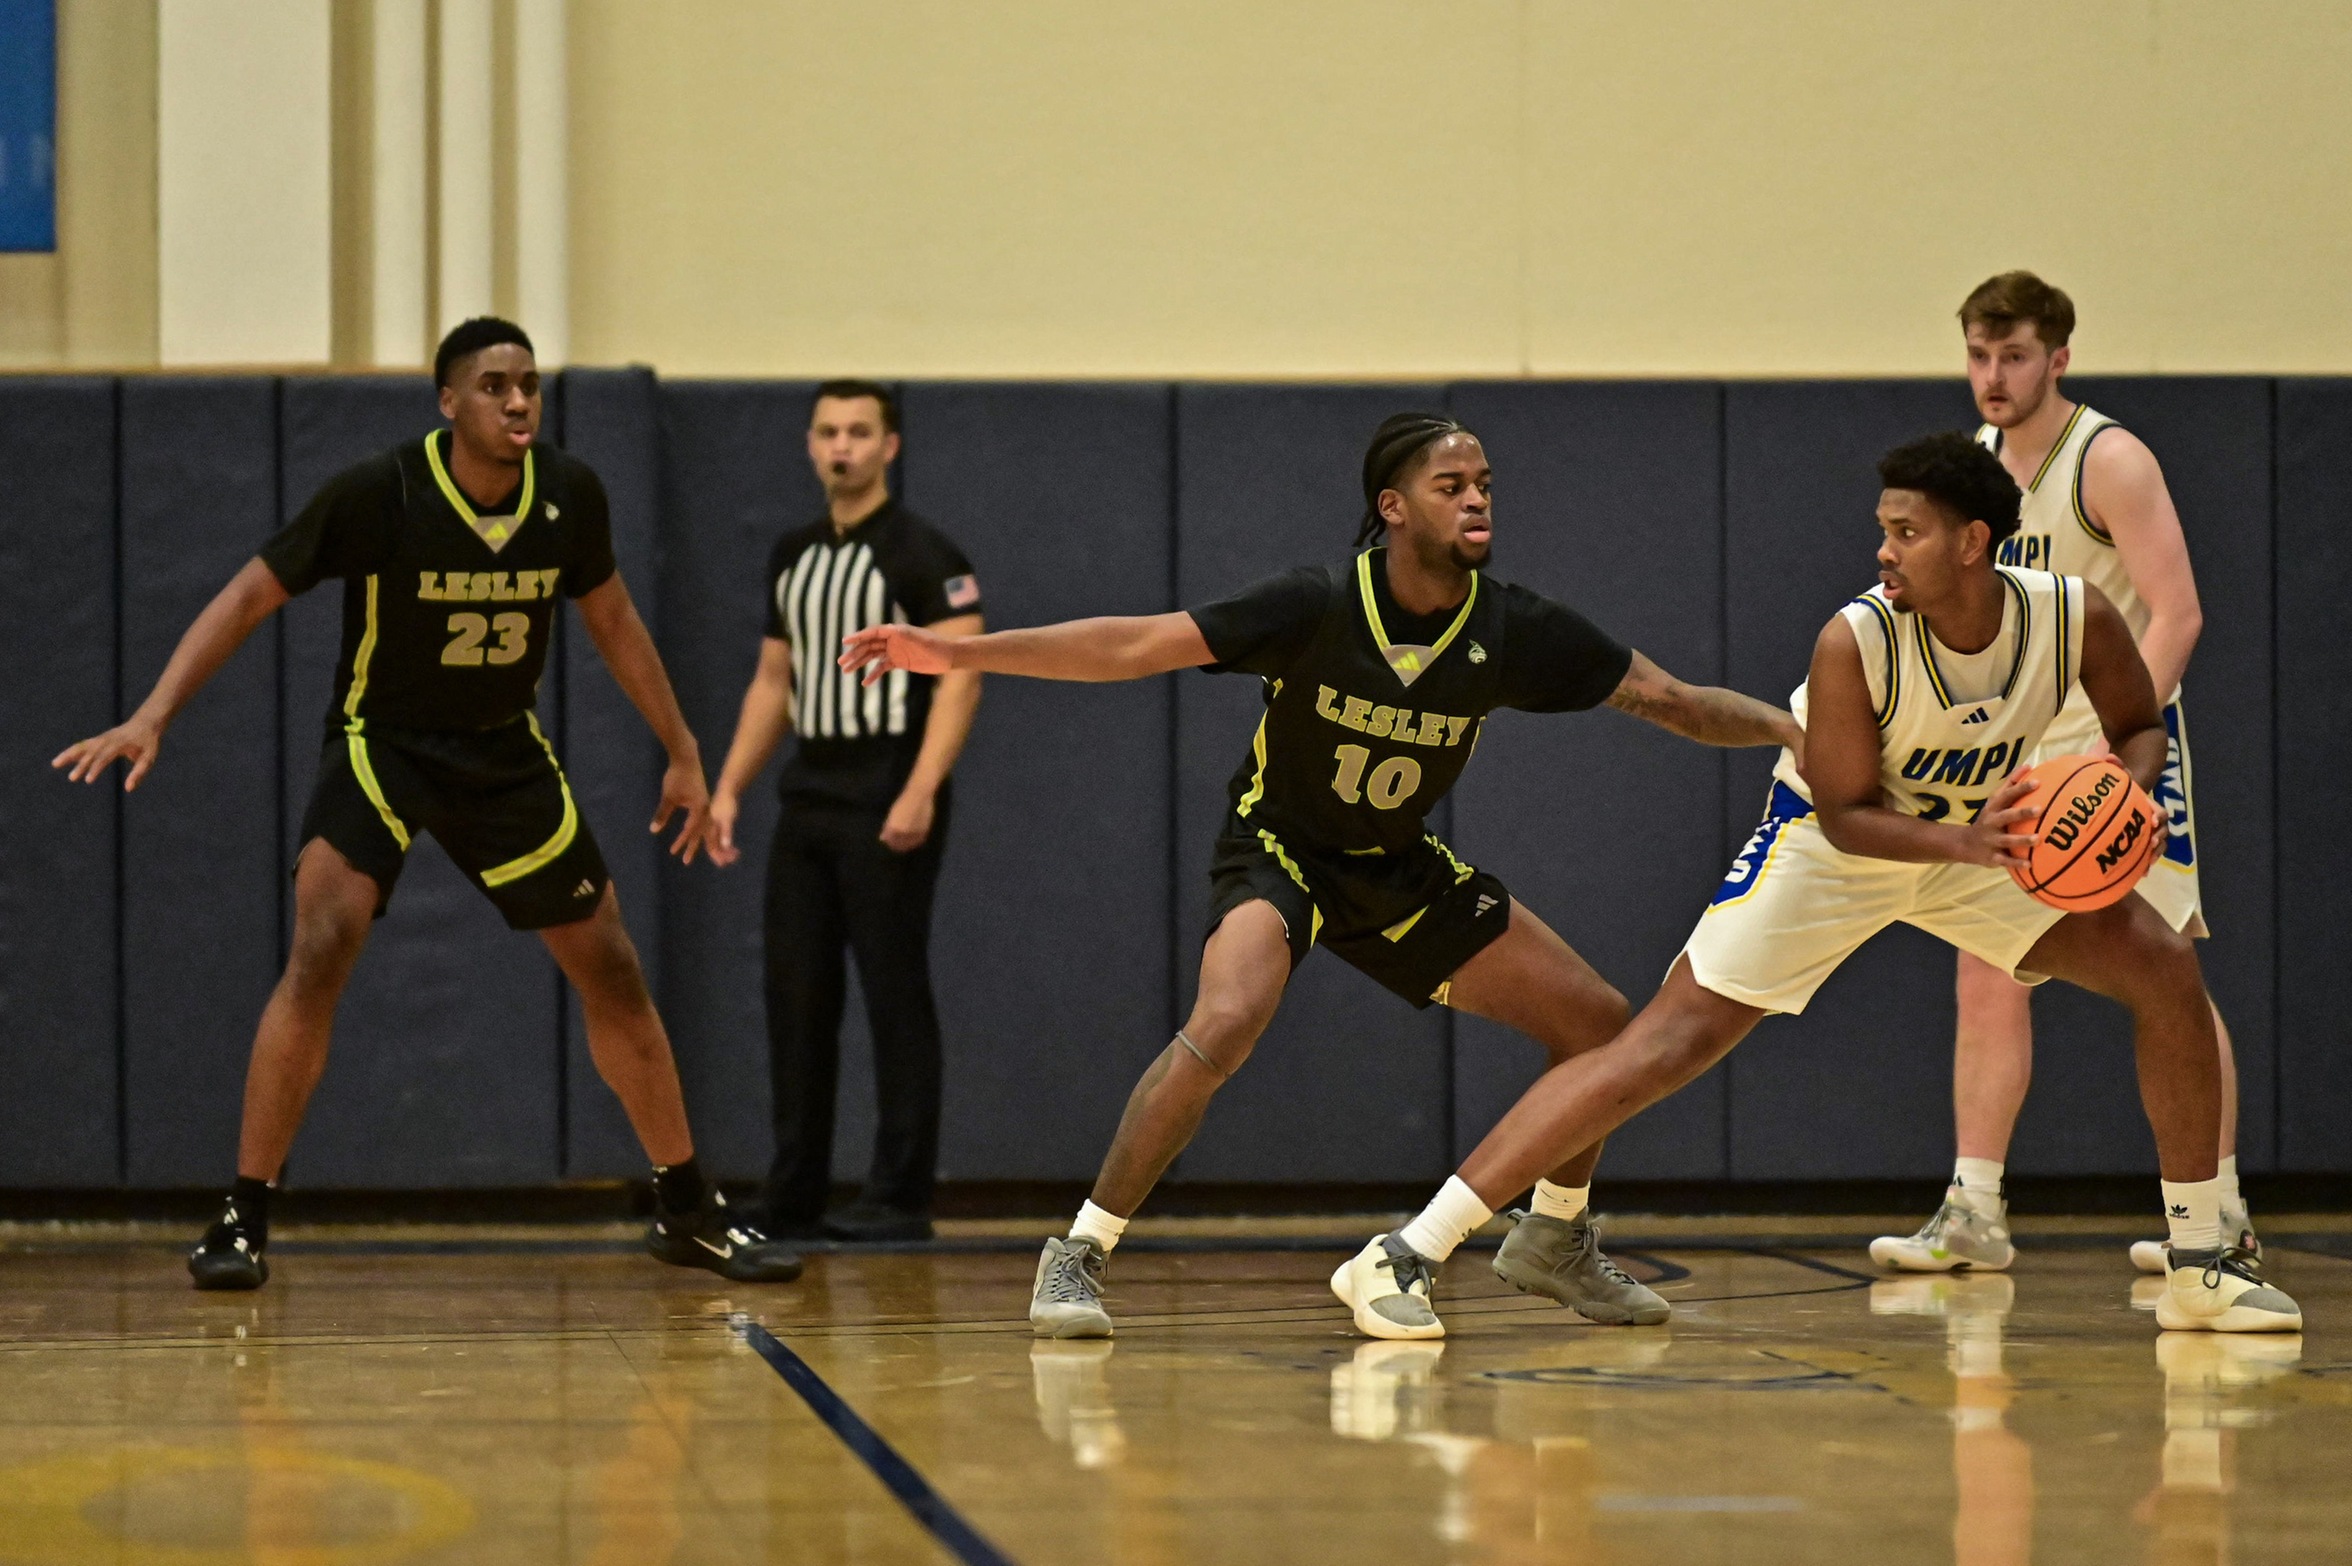 Men's Basketball Splits Weekend Matchups with UMPI for First NAC Win of the Season